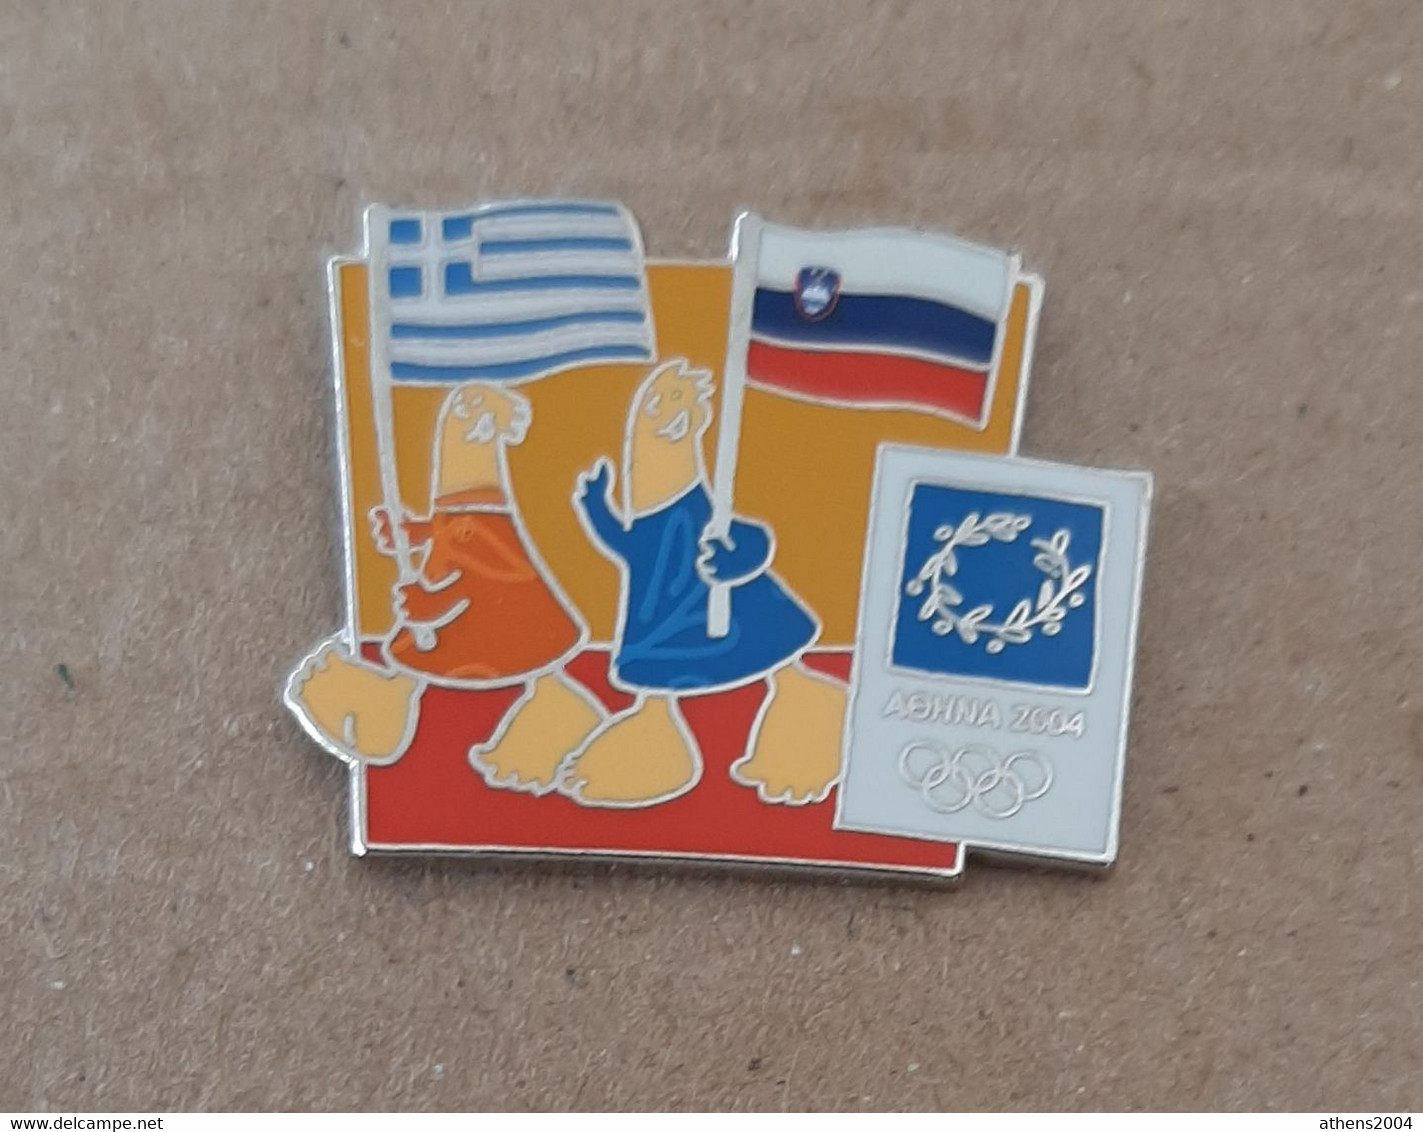 Athens 2004 Olympic Games - Mascots With E.U. Flags, Greece - Slovenia Flags Pin - Jeux Olympiques